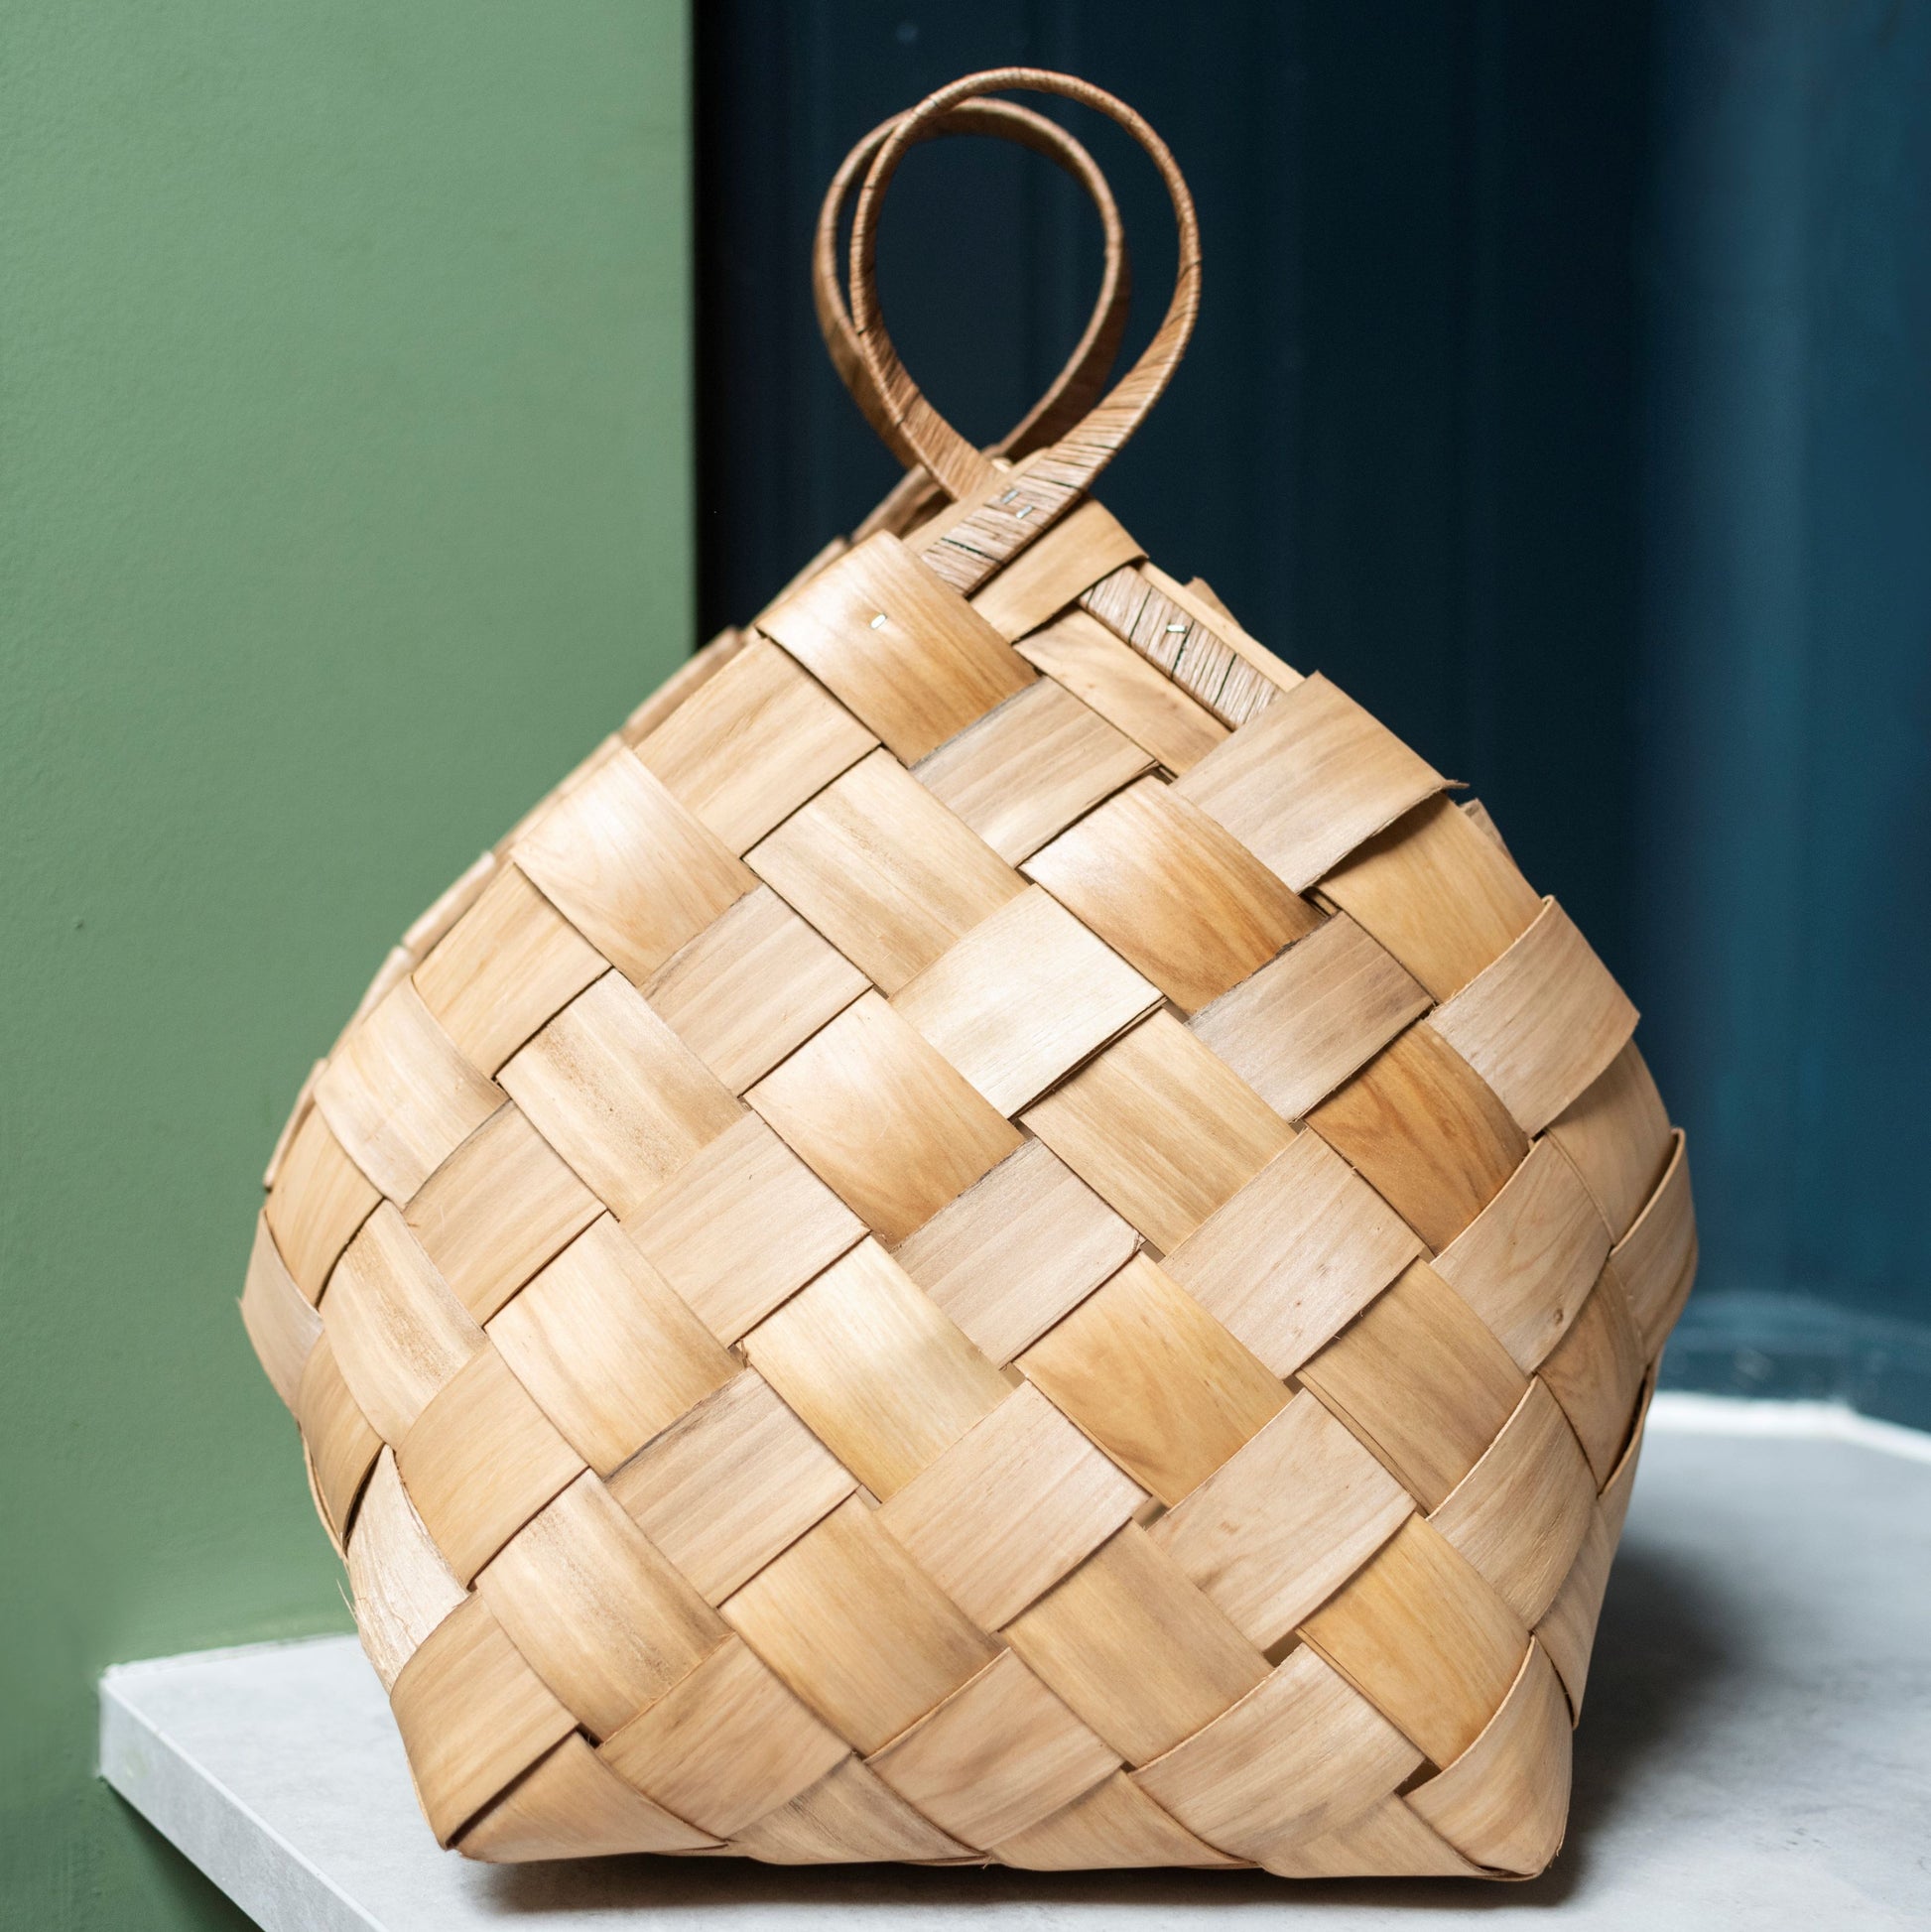 Woven Pine Conical Basket - small - The Bristol Artisan Handmade Sustainable Gifts and Homewares.